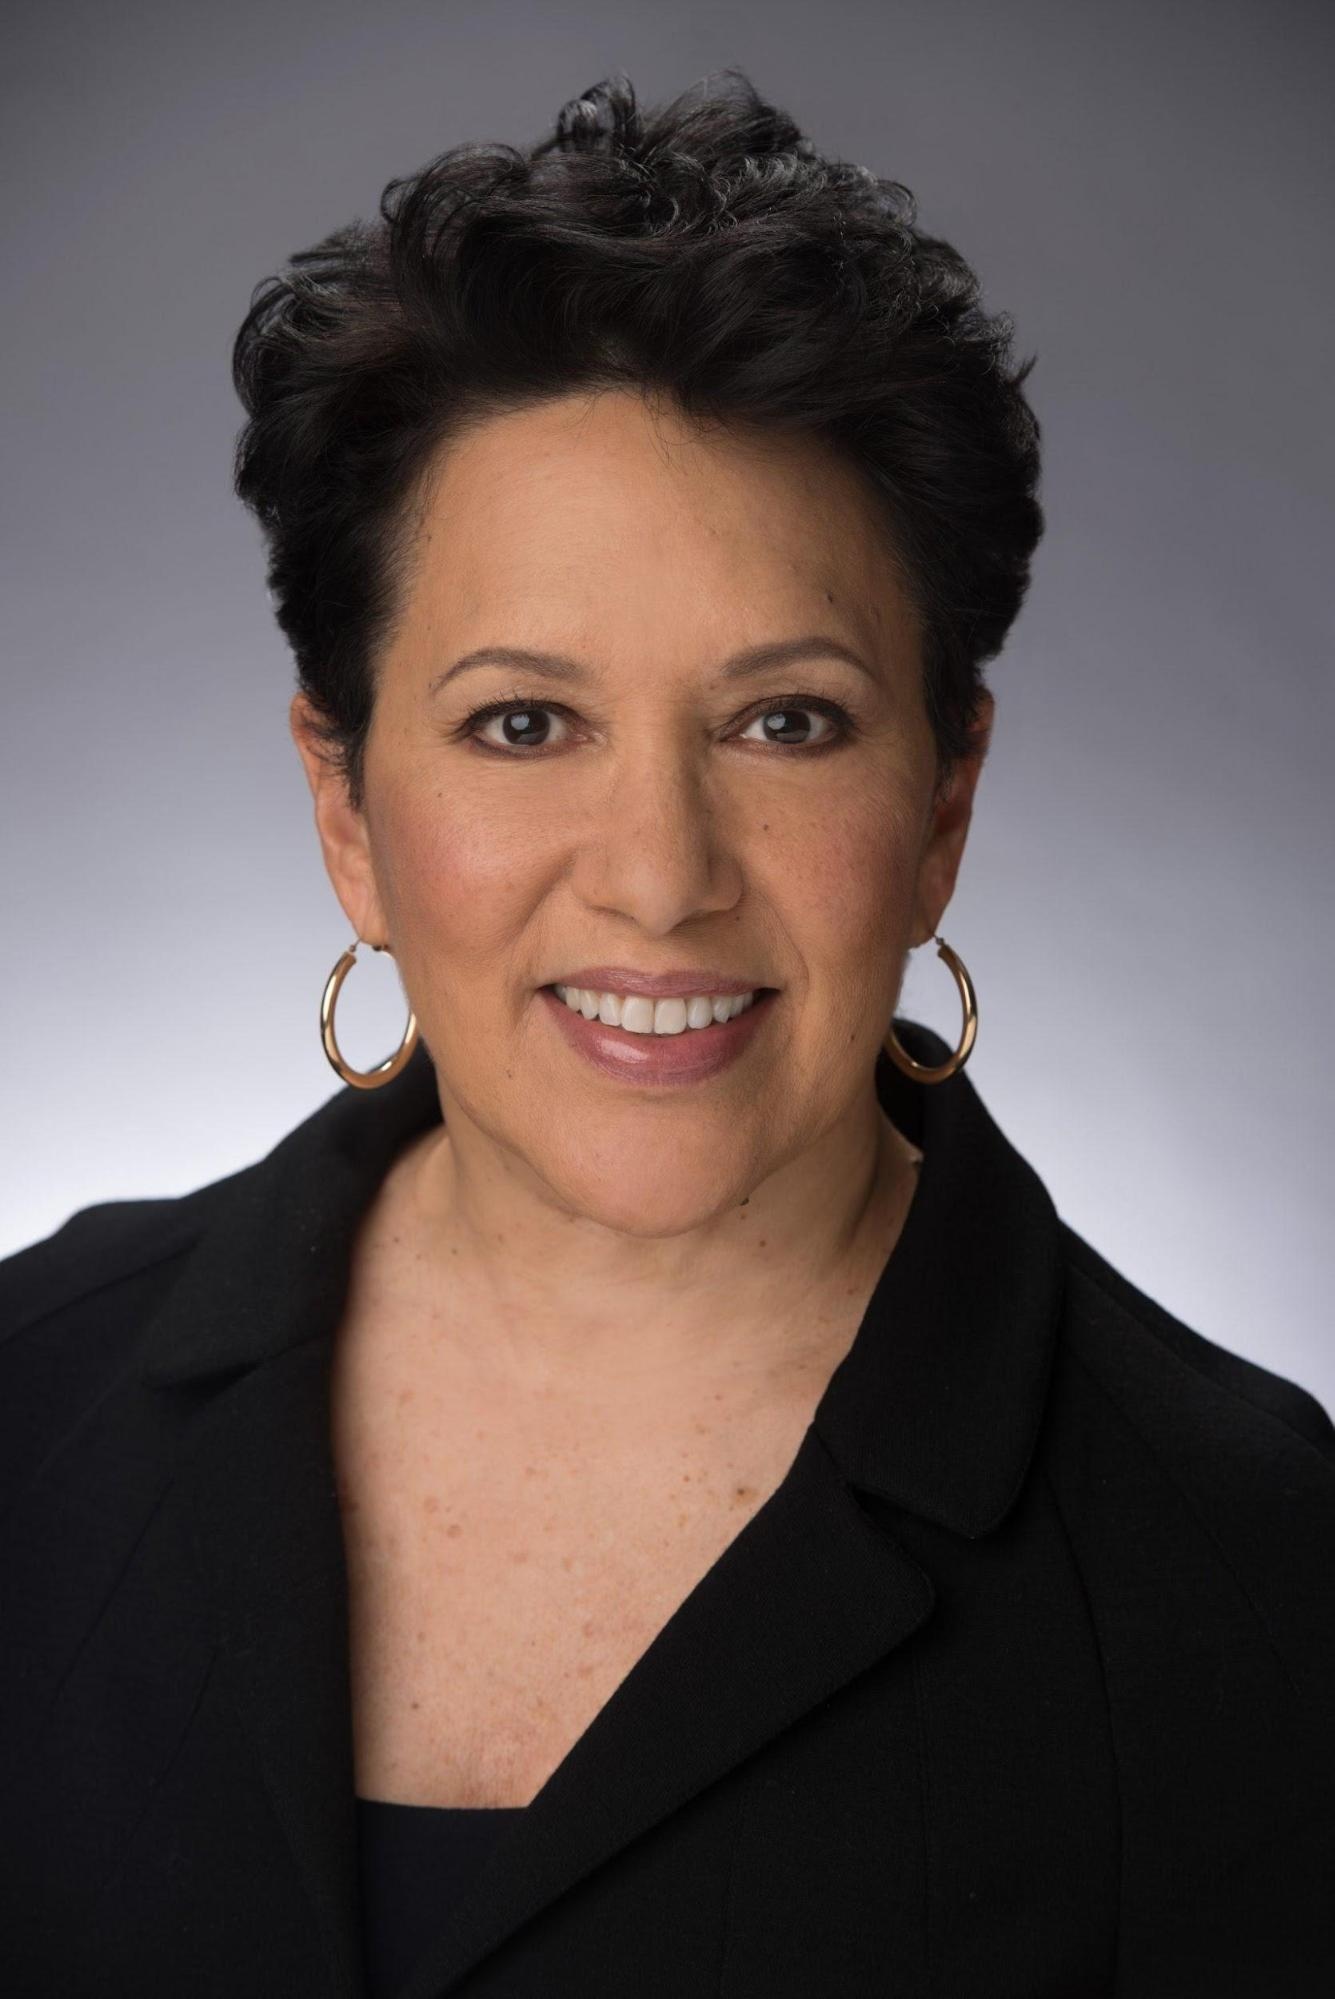 A portrait of cultural worker, producer, and presenter Mikki Shepard, a Black woman with short hair. She wears a black suit jacket and hoop earrings while smiling.